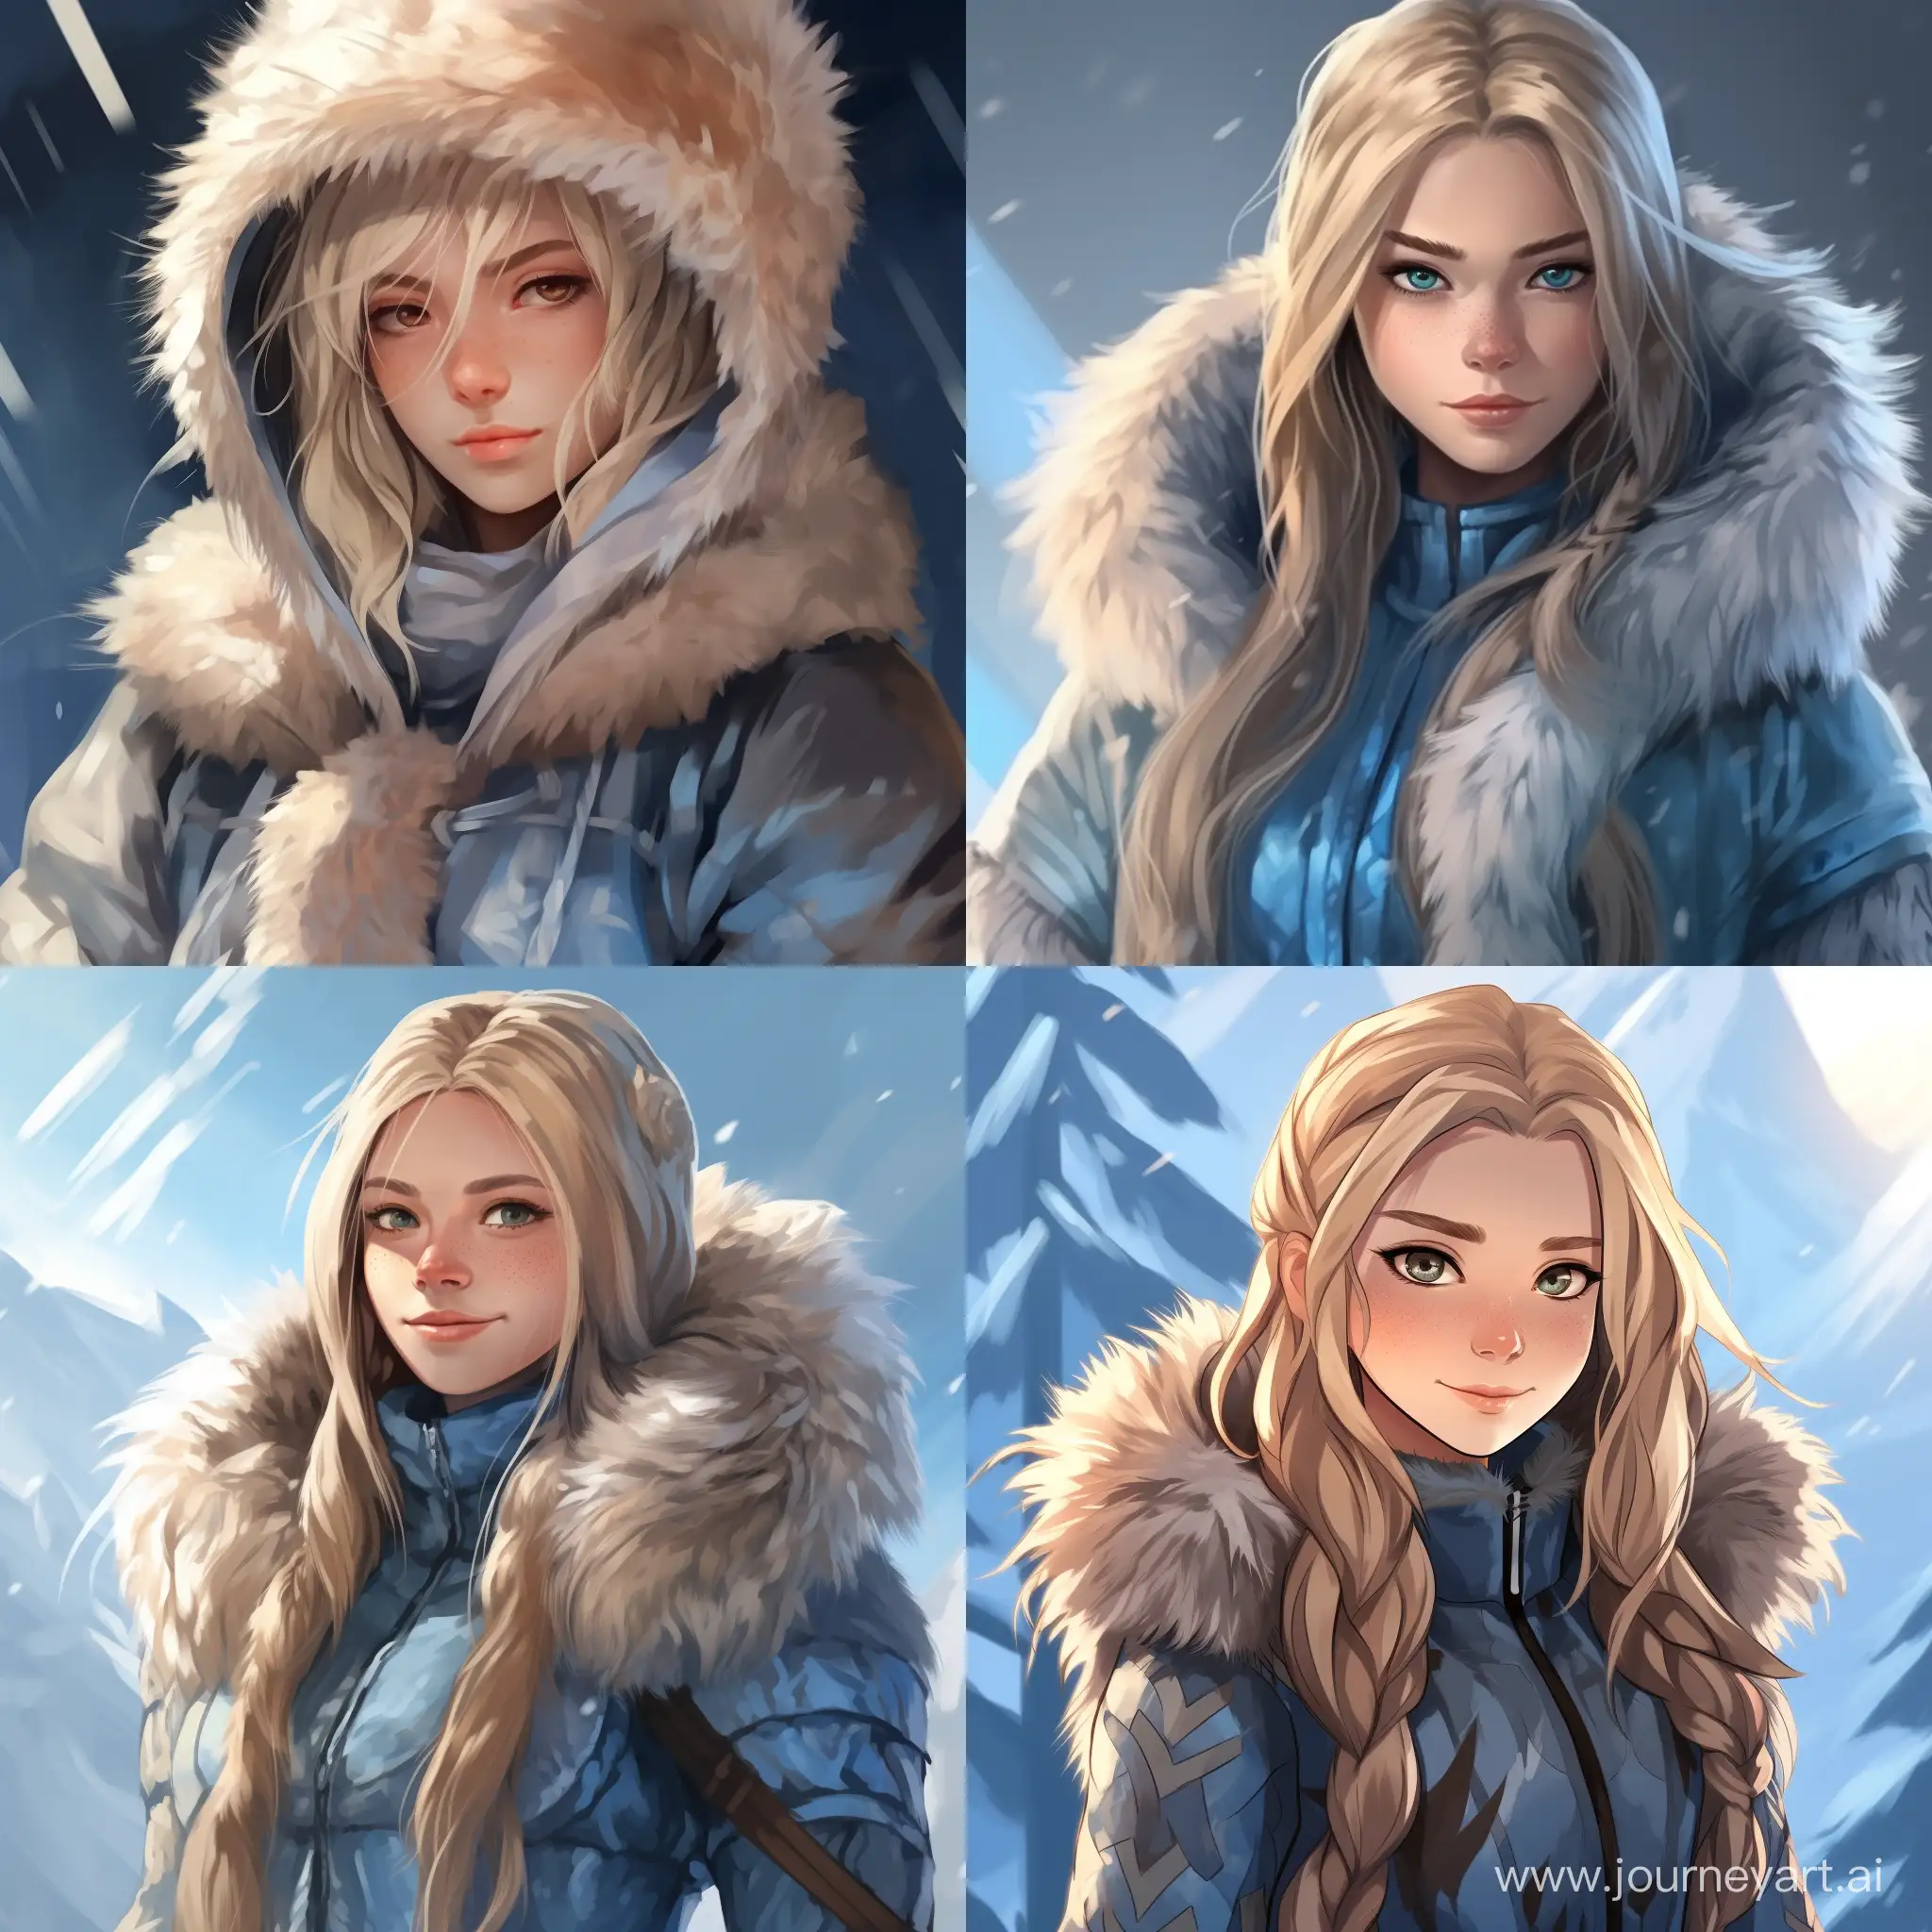 beautiful girl, straight blonde hair, gray eyes, teenager, in a blue fur coat, winter, Avatar legend of aang, South pole, high quality, high detail, cartoon art